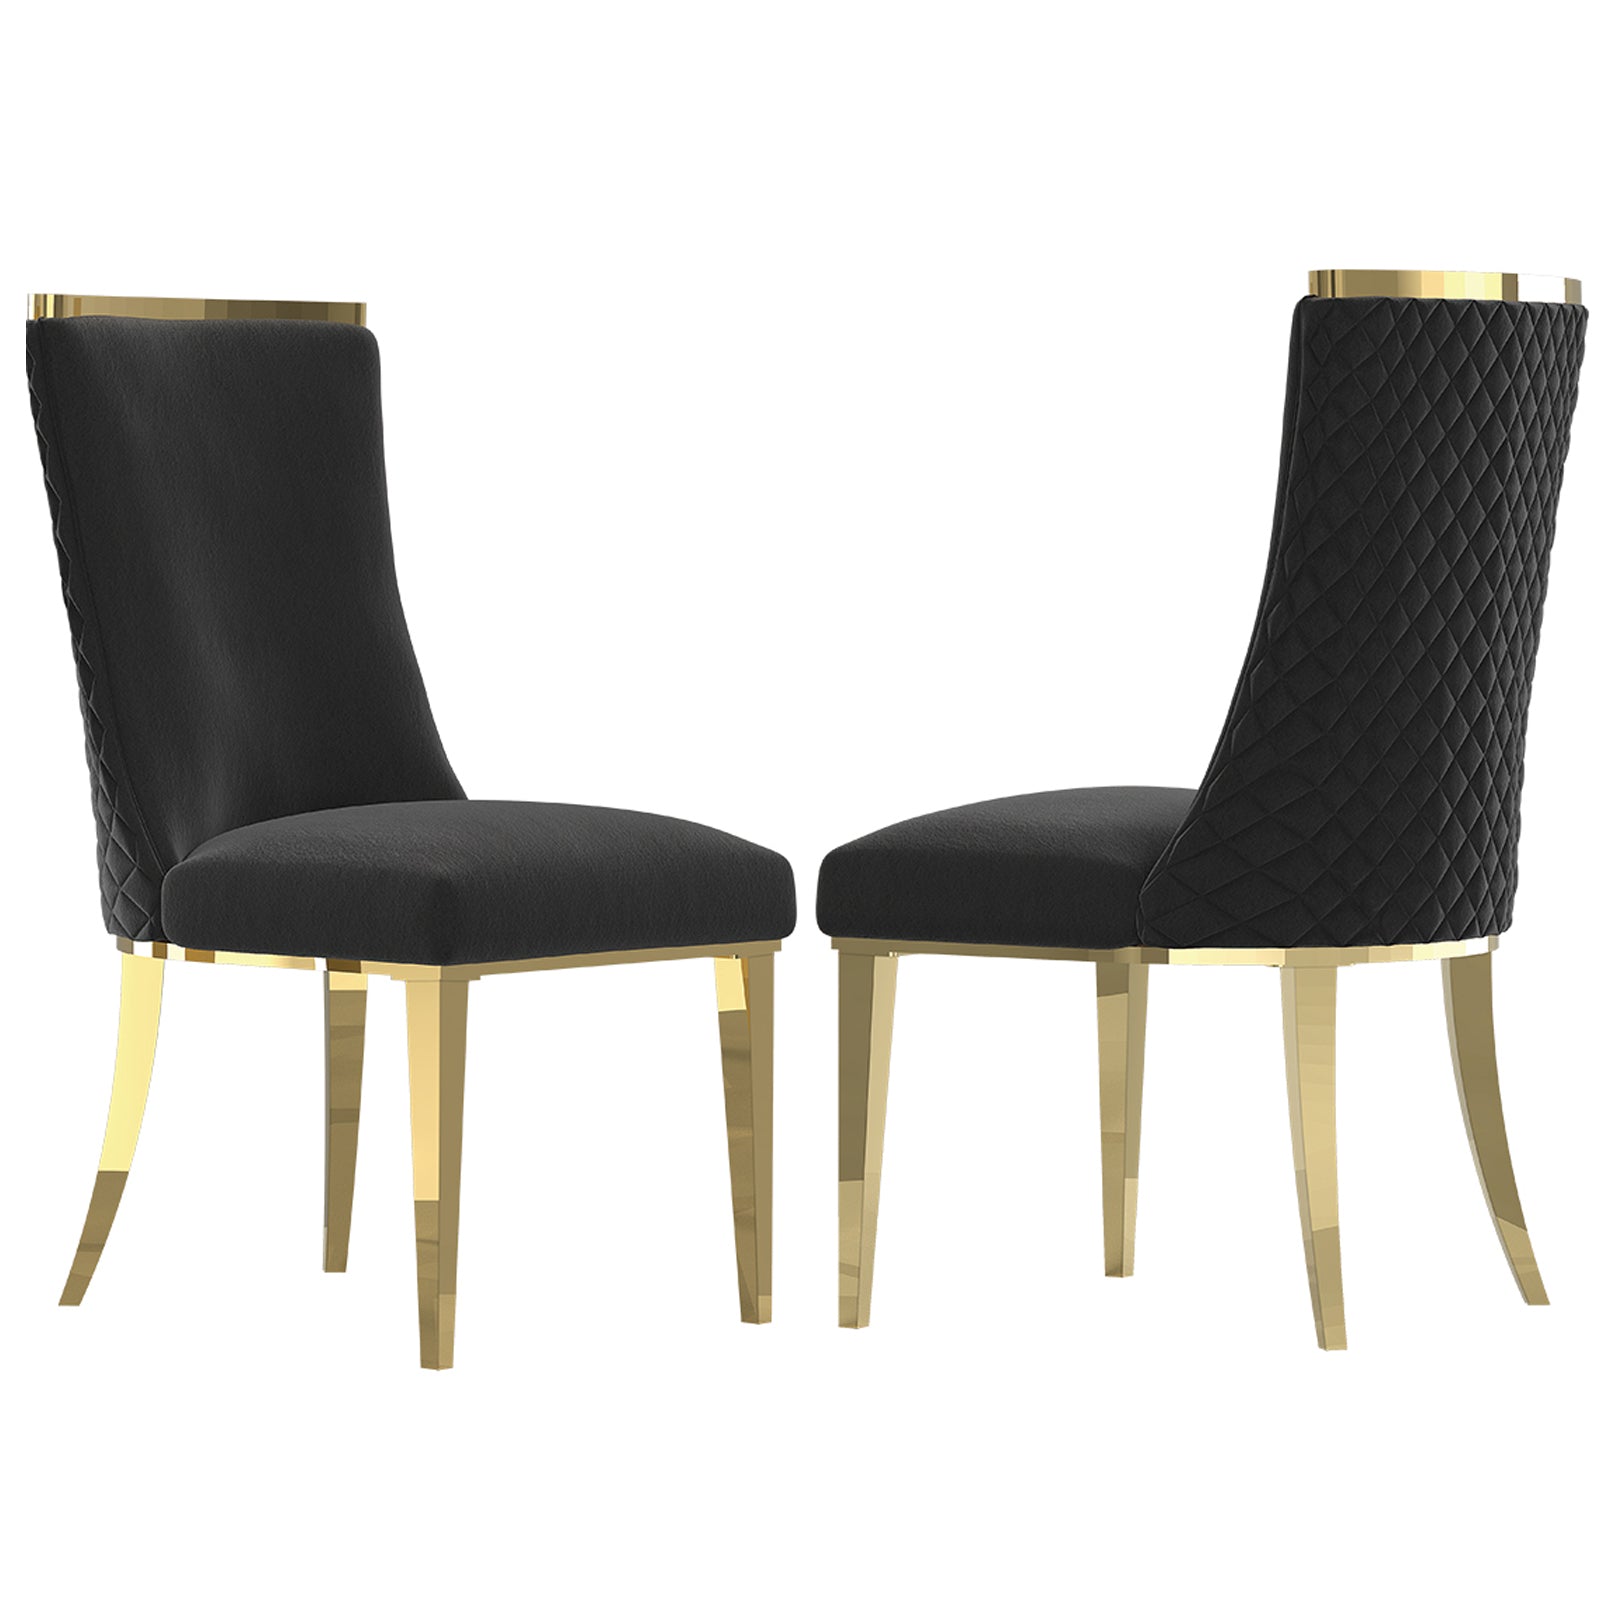 Black Velvet Dining Chairs | Reticulate Texture Back| Gold Metal Legs | C136